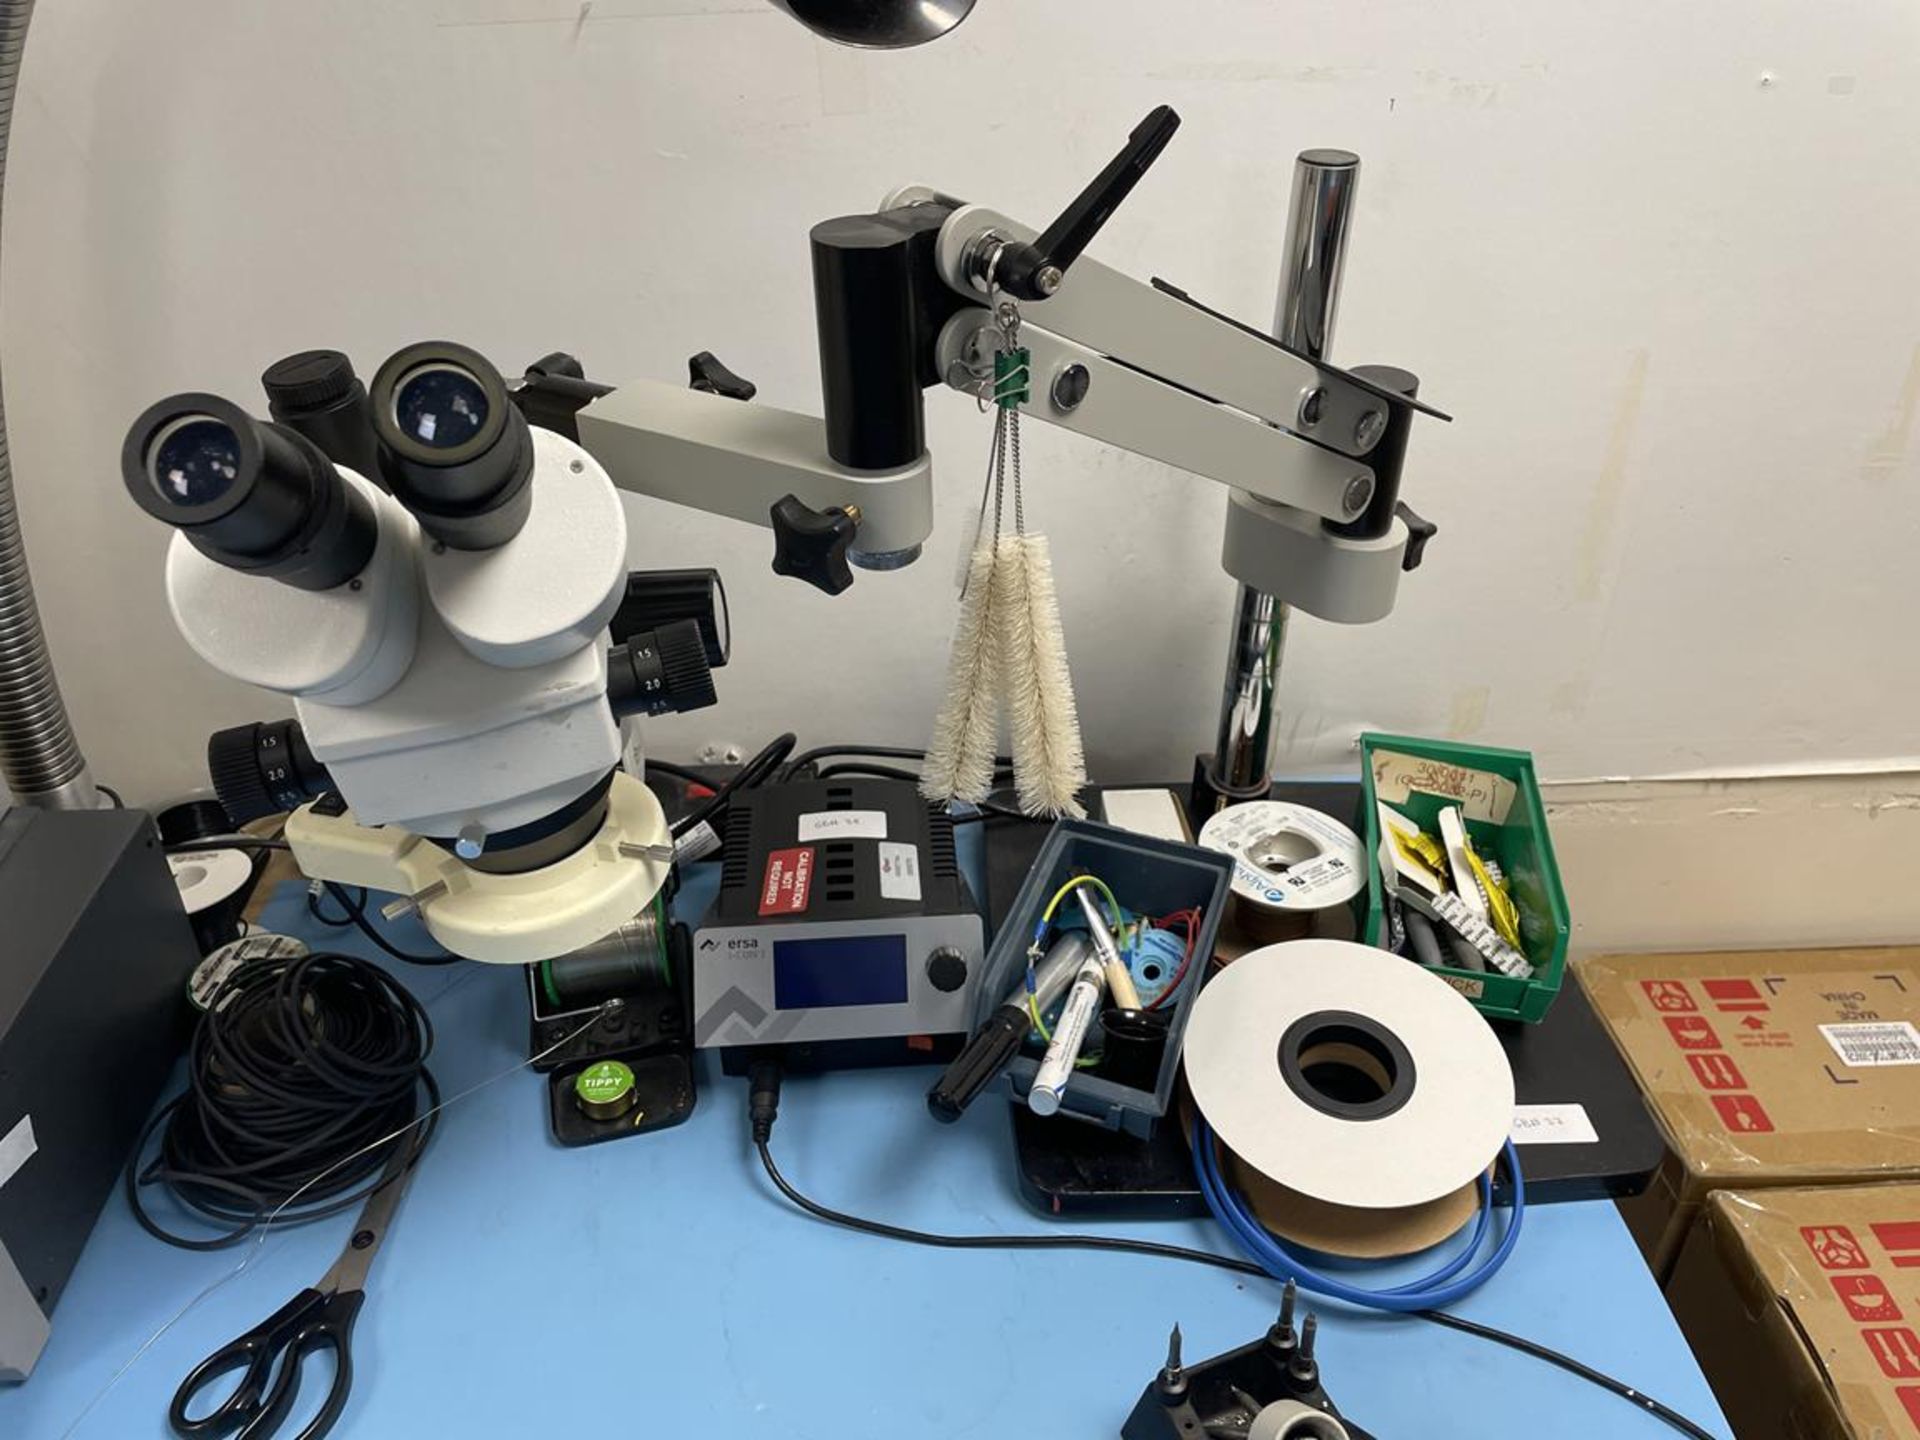 GXMRFLS Adjustable Microscope Fitted with WF10X Lenses (GB REF#37)